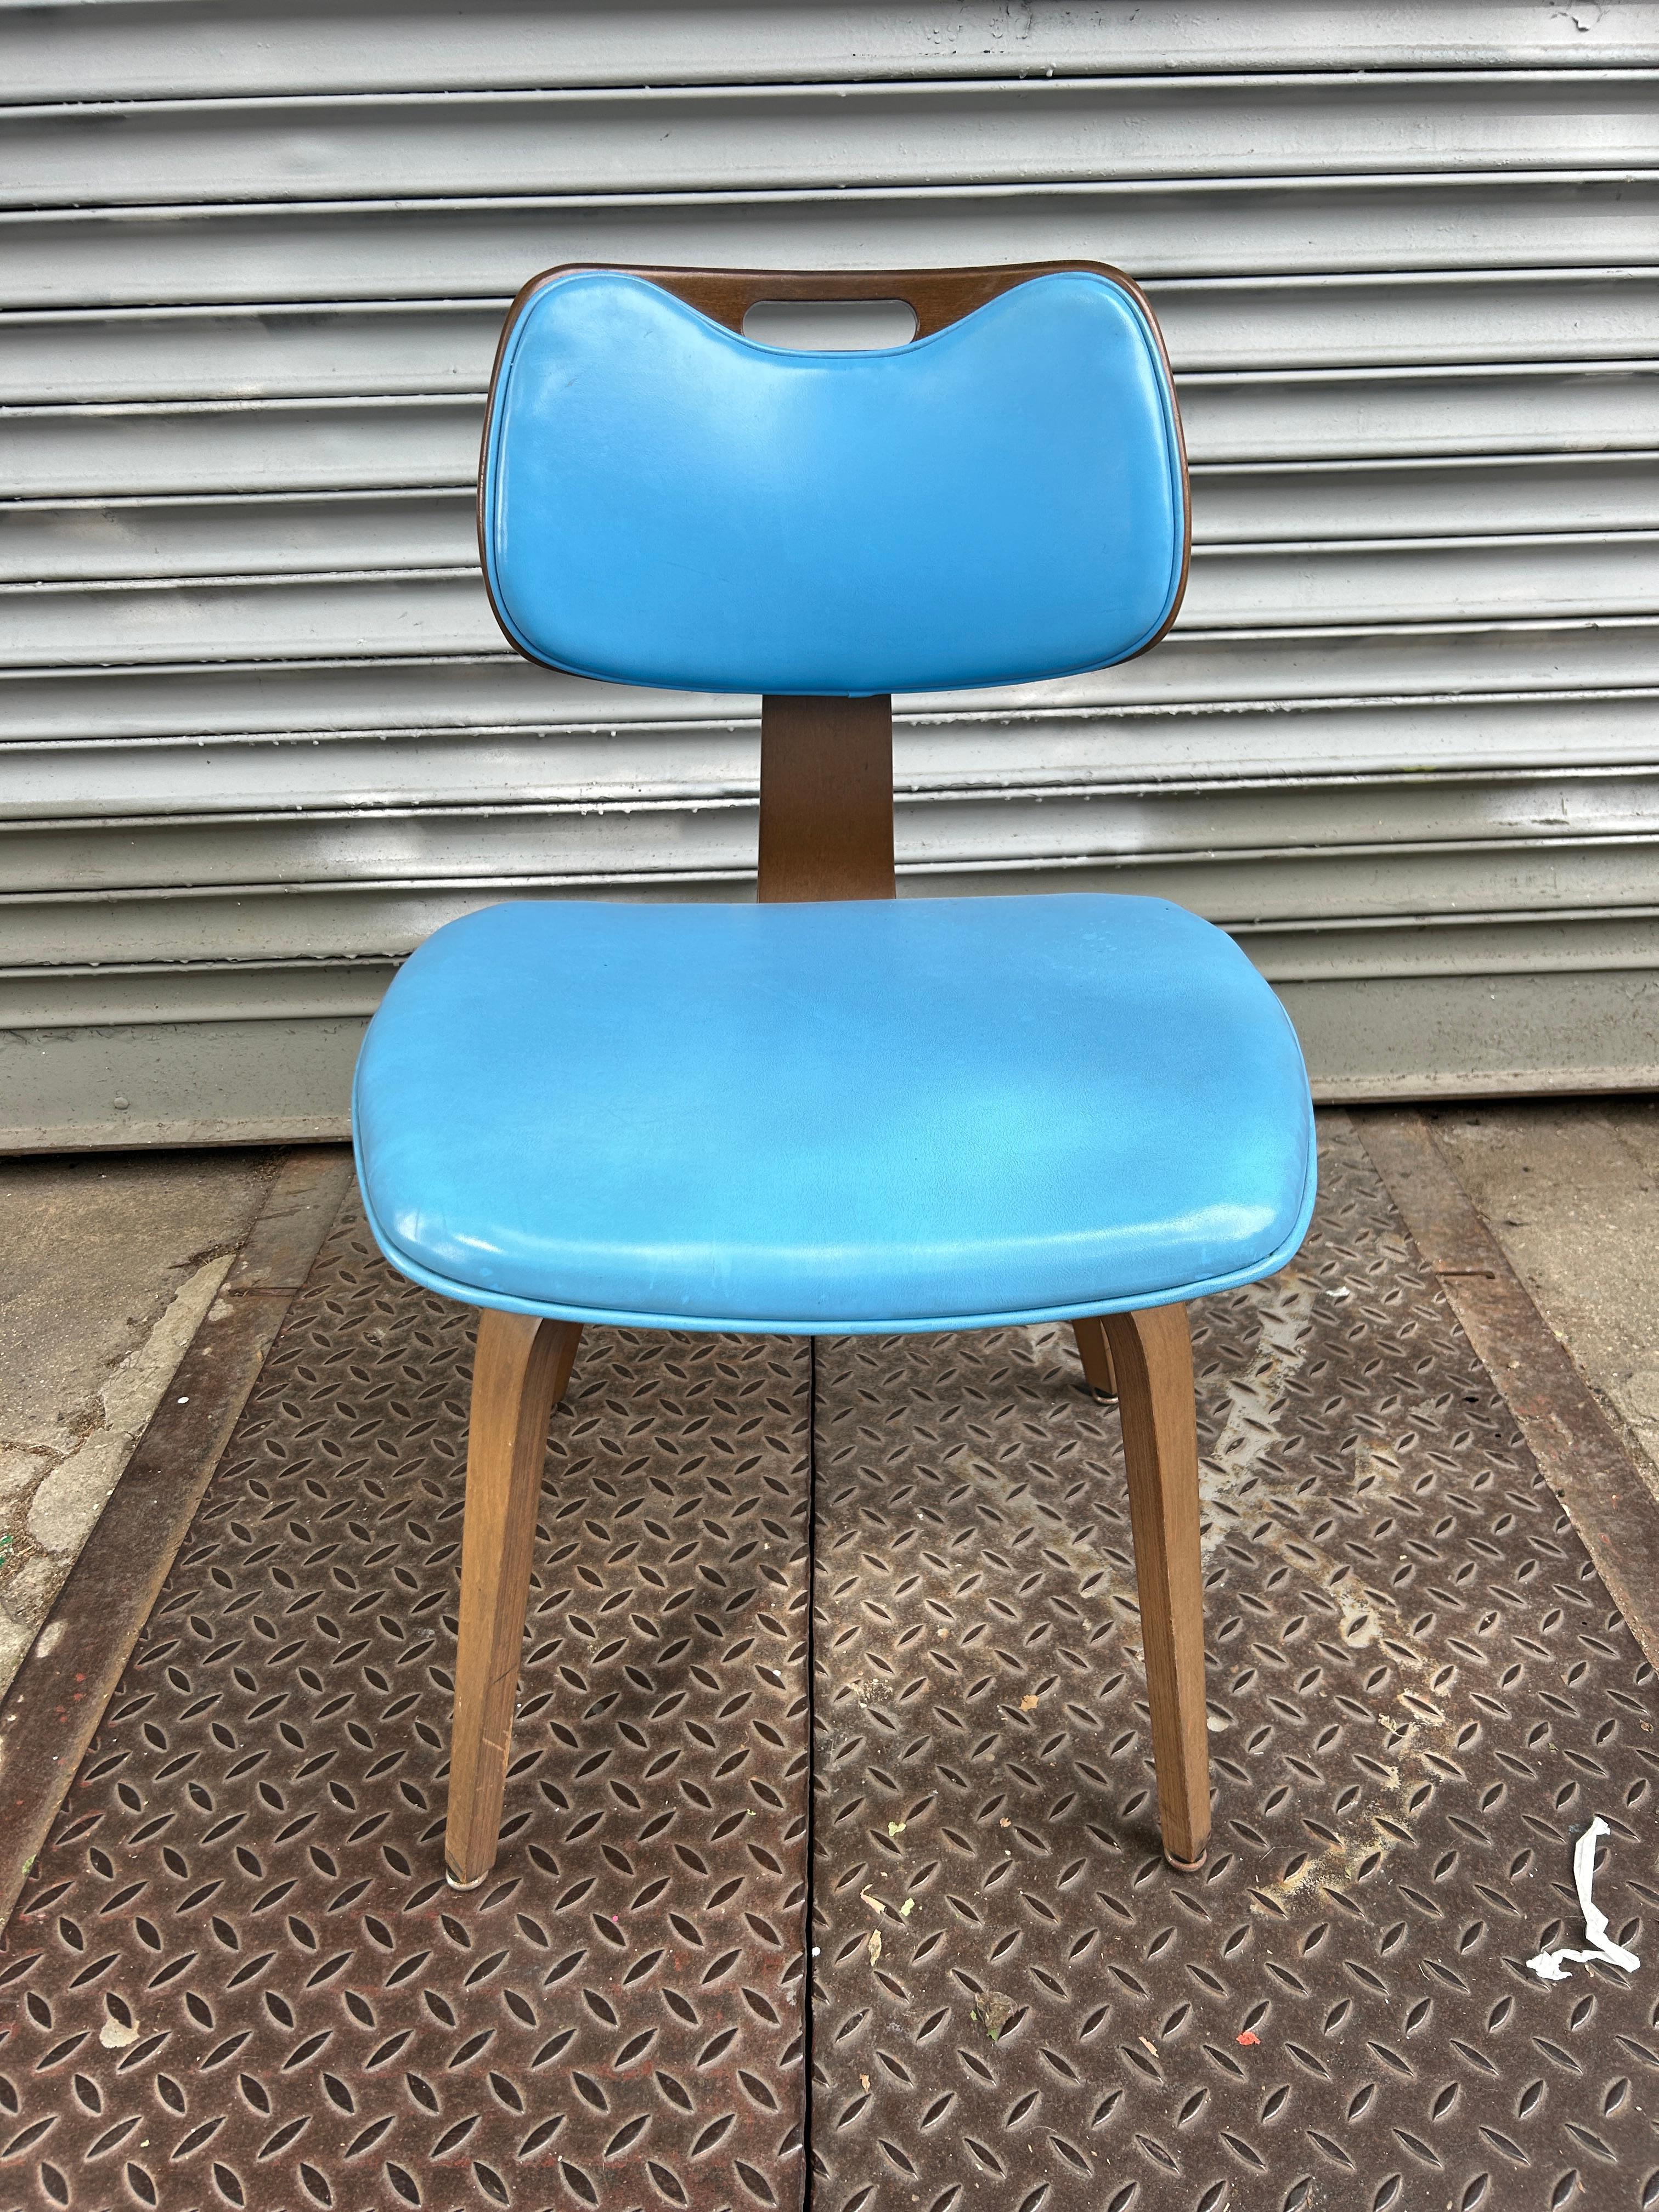 (1) Mid-Century Modern Thonet bentwood Walnut dining Chair with handle and Light Blue Vinyl Upholstery. Has original label. Great vintage condition. Timeless chair design by Thonet. Curved birch bentwood legs. Located in Brooklyn NYC.

(5) chairs